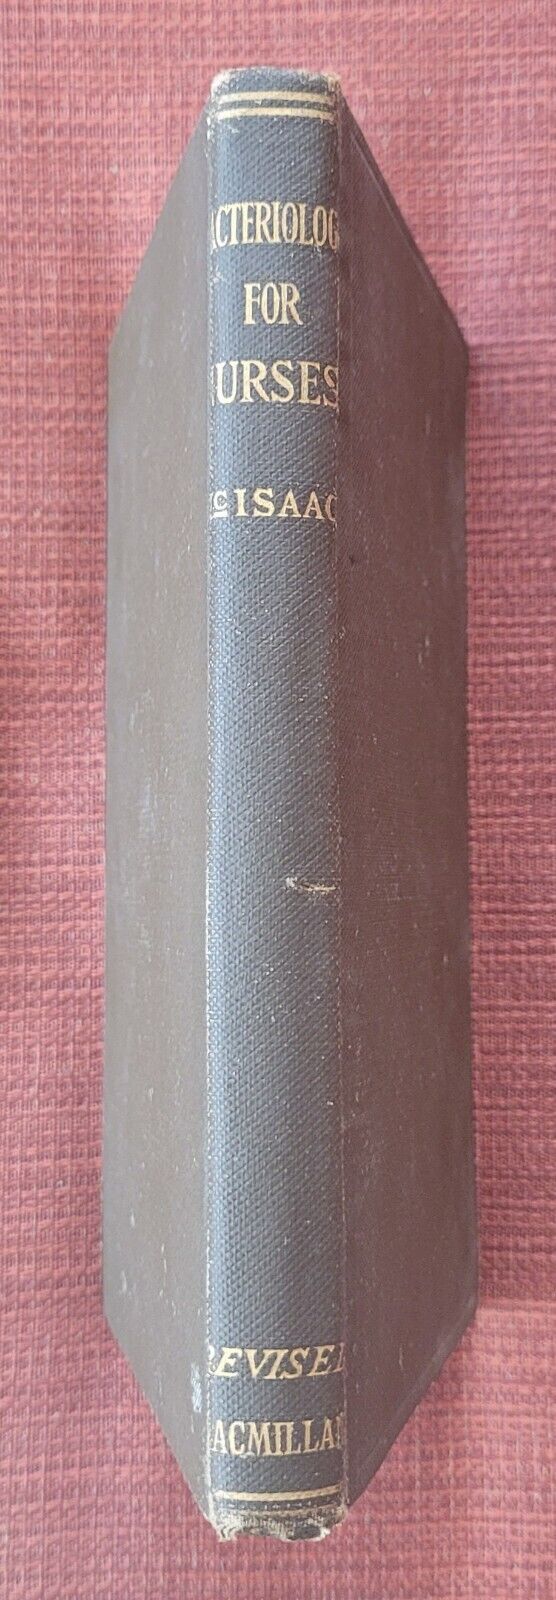 Bacteriology for Nurses 1921 Hardcover By Isabel McIsaac 2nd Ed.